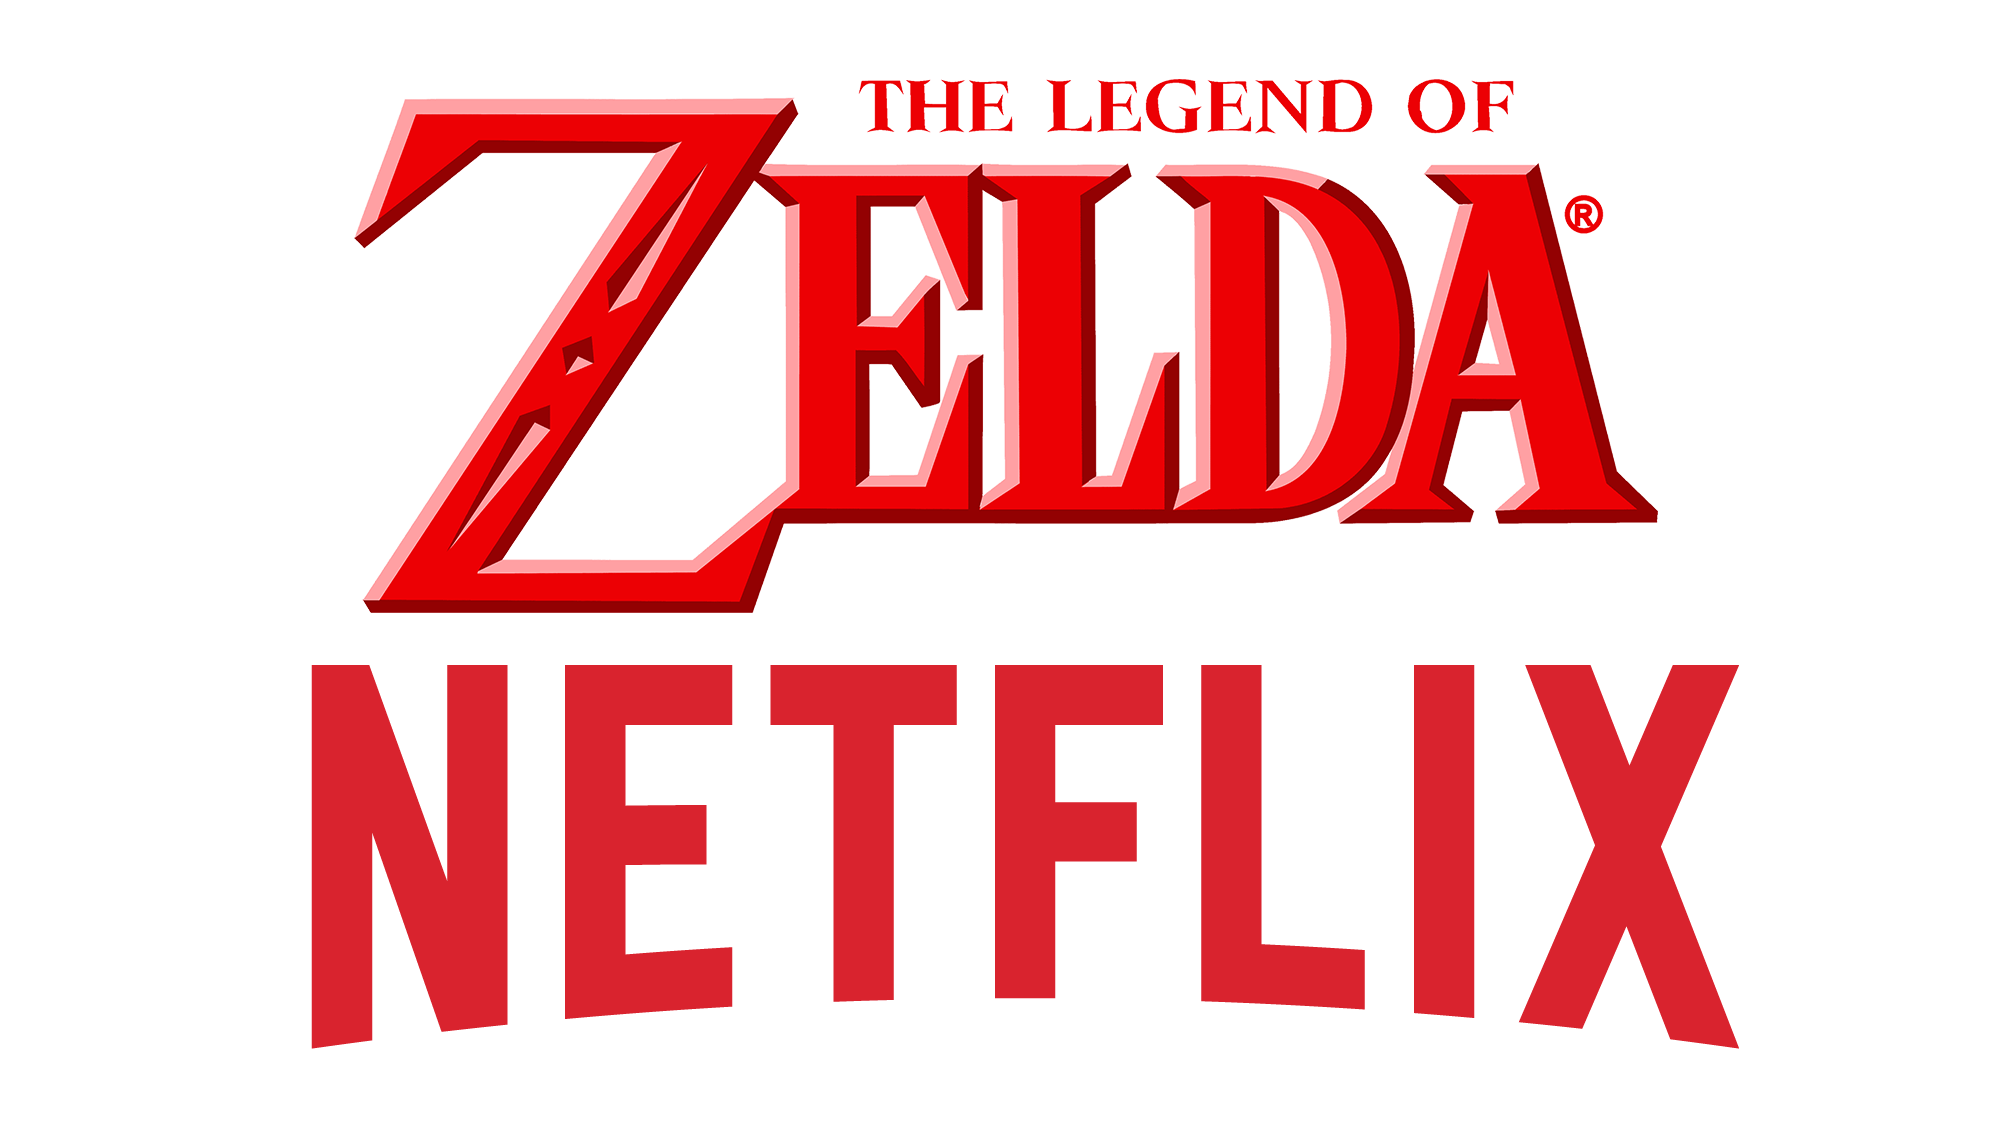 Will there be a Legend of Zelda series on Netflix? | What to Watch